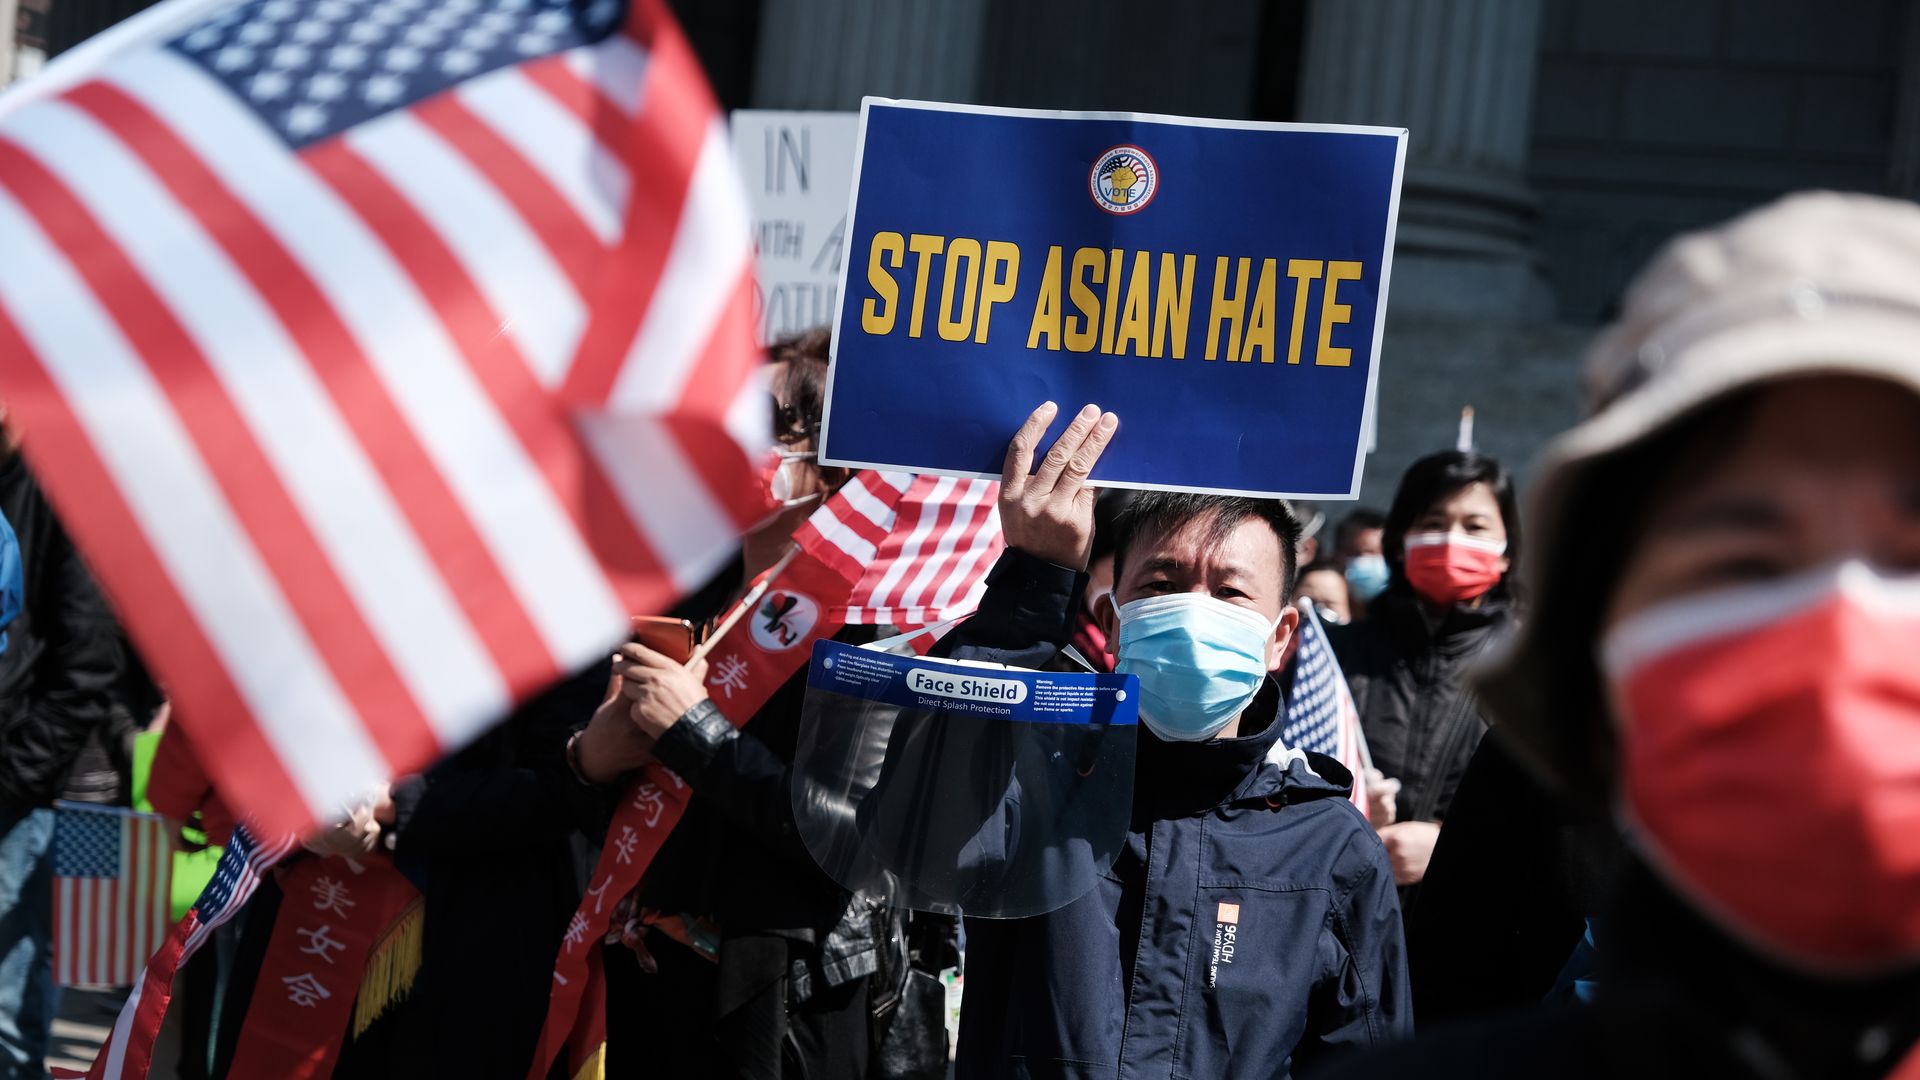 Demostrators participate in a protest to demand an end to anti-Asian violence on April 04, 2021 in New York City.